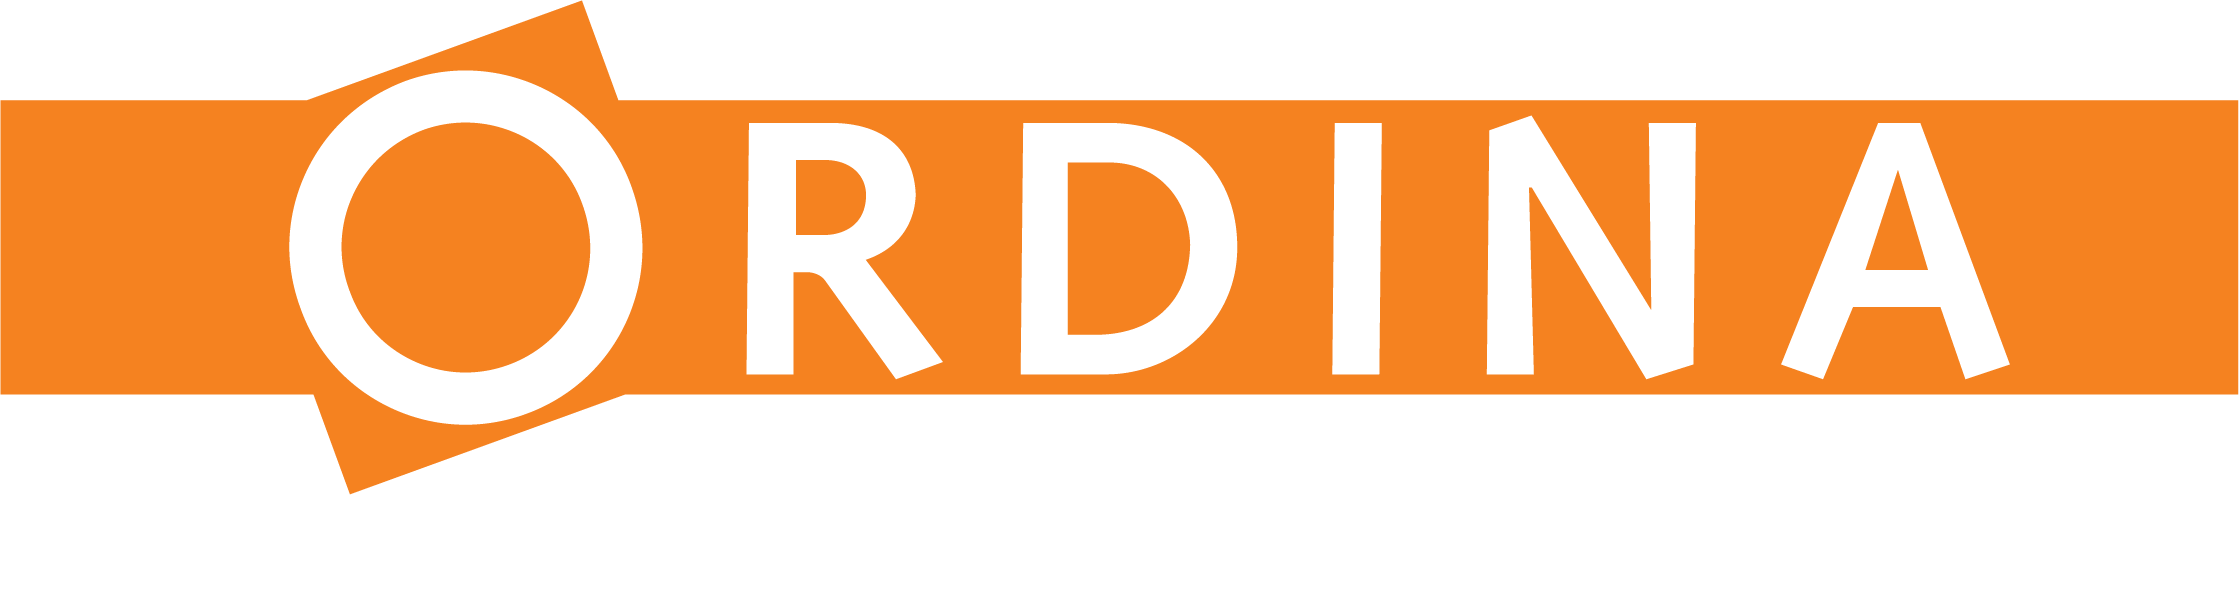 Powered by Ordina - Ahead of change